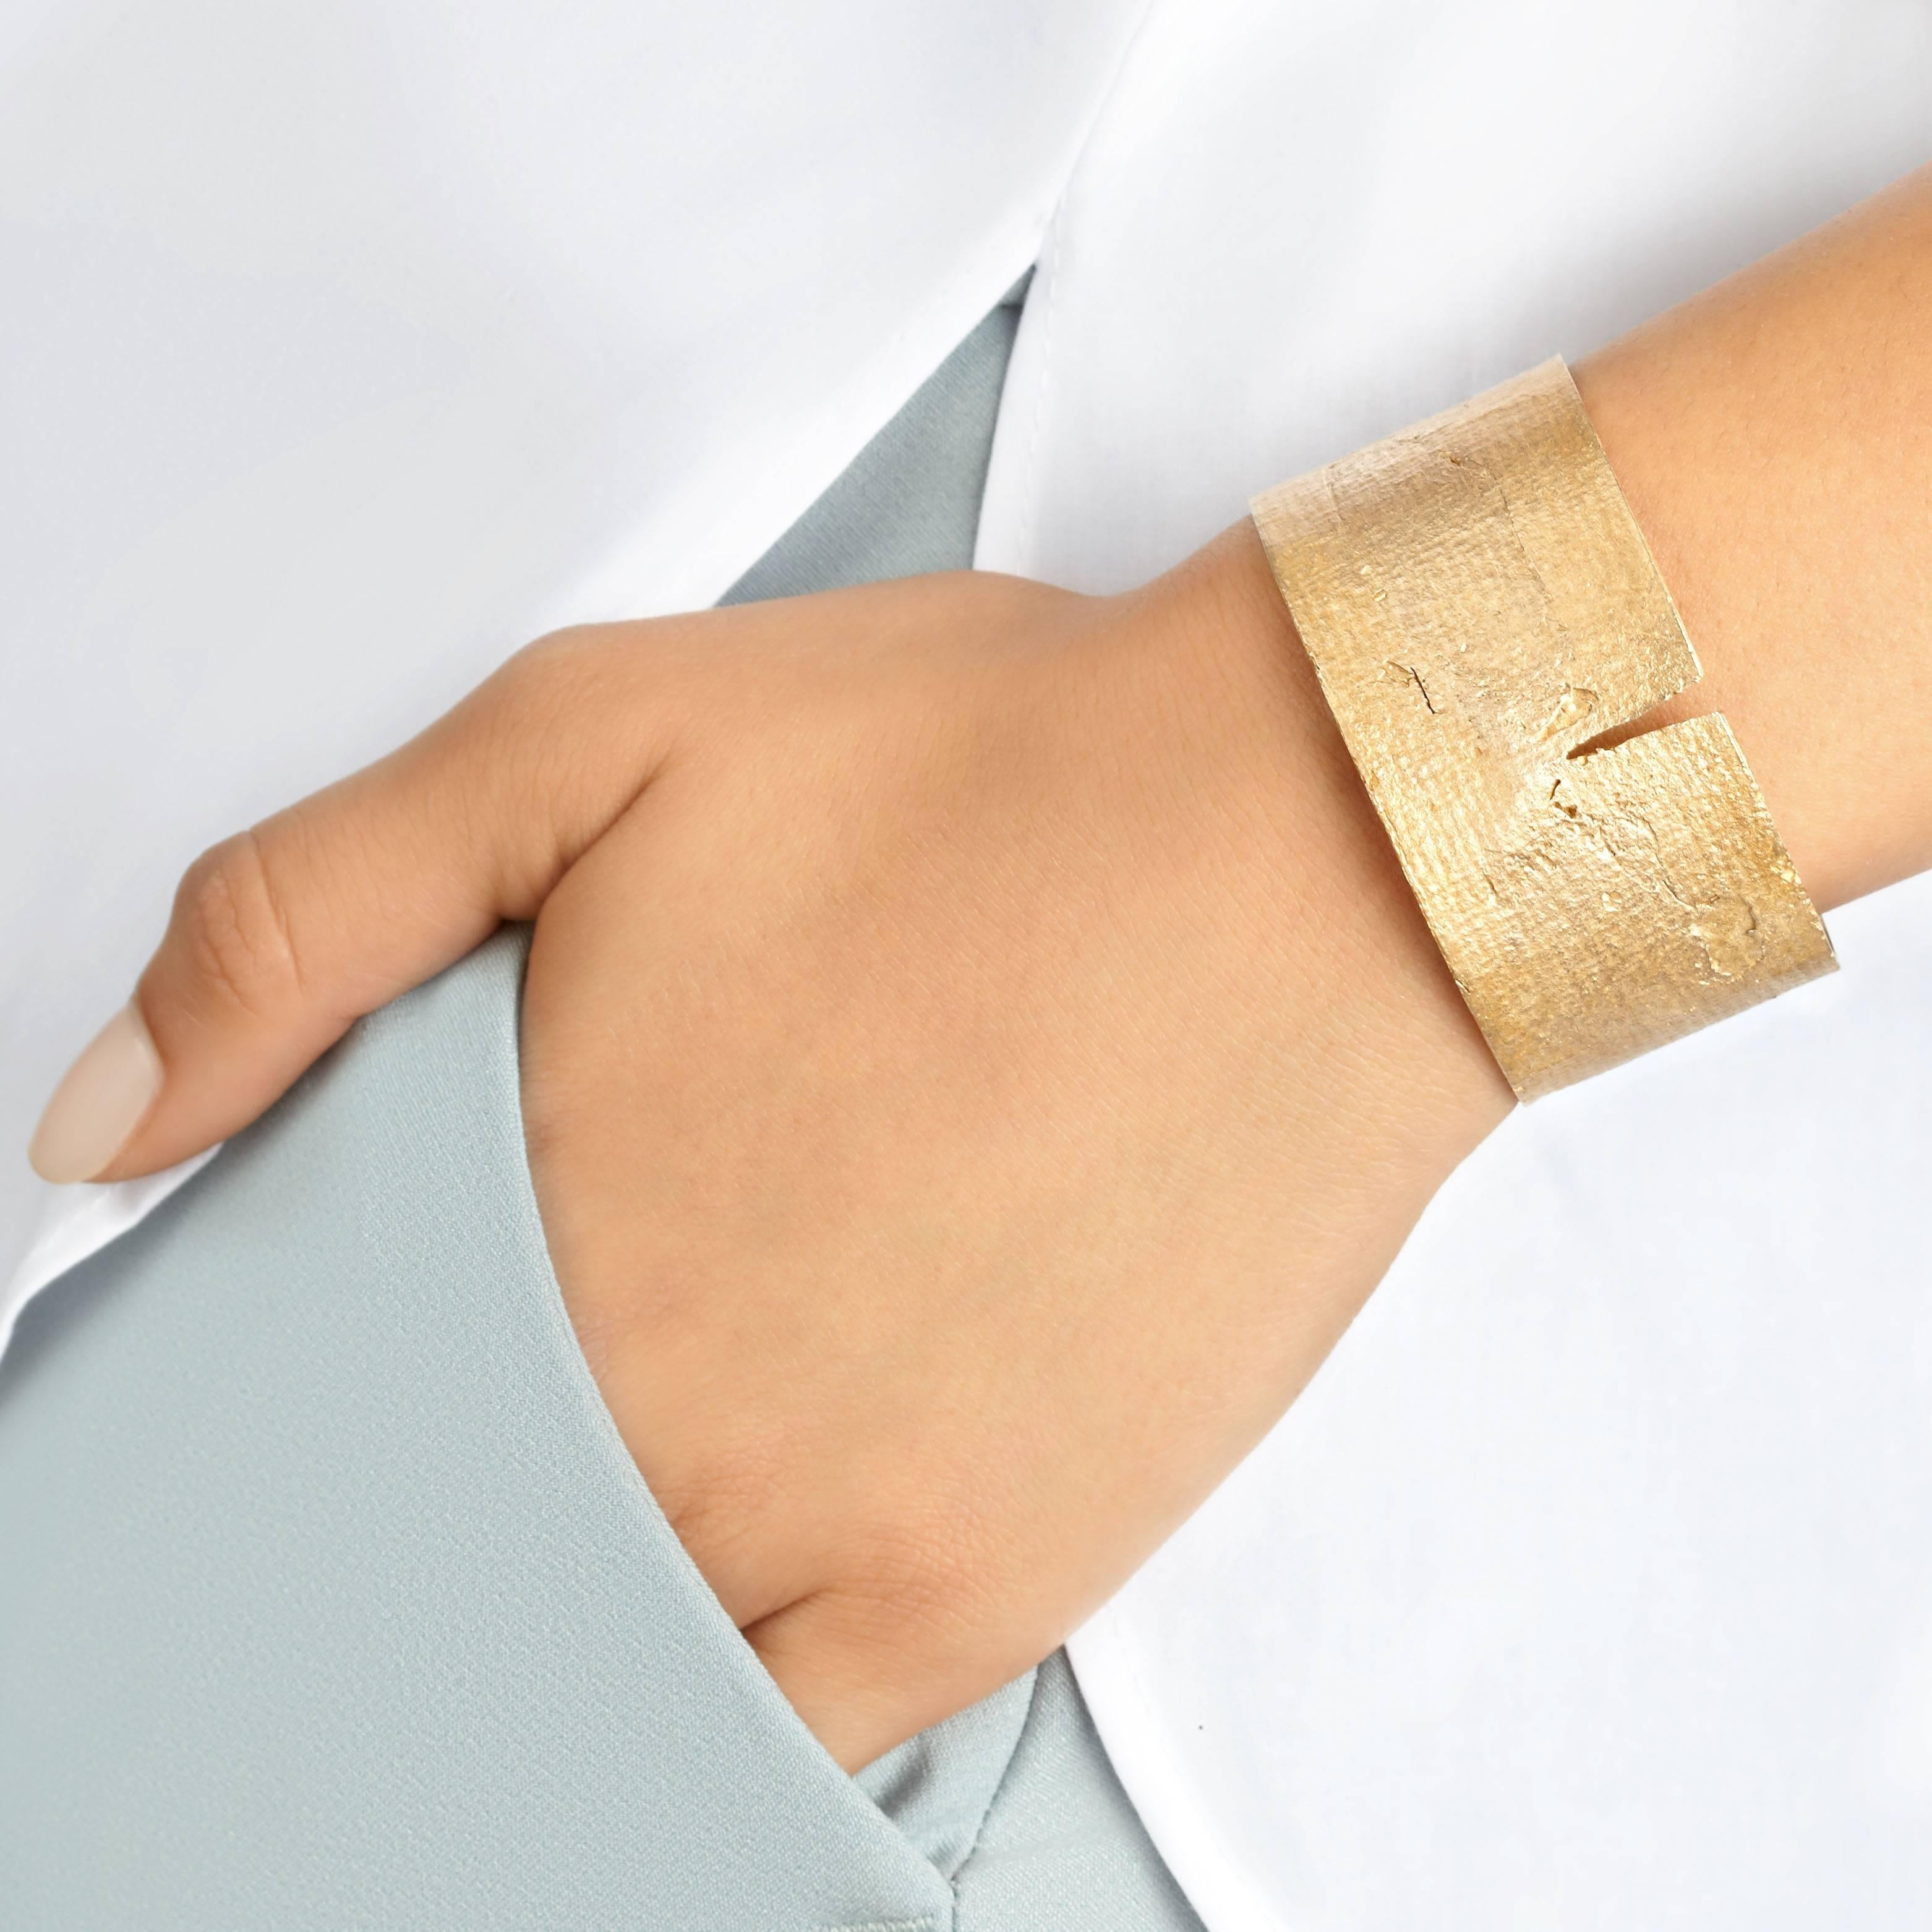 Crafted in solid, glowing bronze, the Split Mega Cuff is a subtle statement piece for every day. The unique texture and split detail add interest to this classic wide cuff. 

Every piece in this collection is individually hand-crafted in paper and